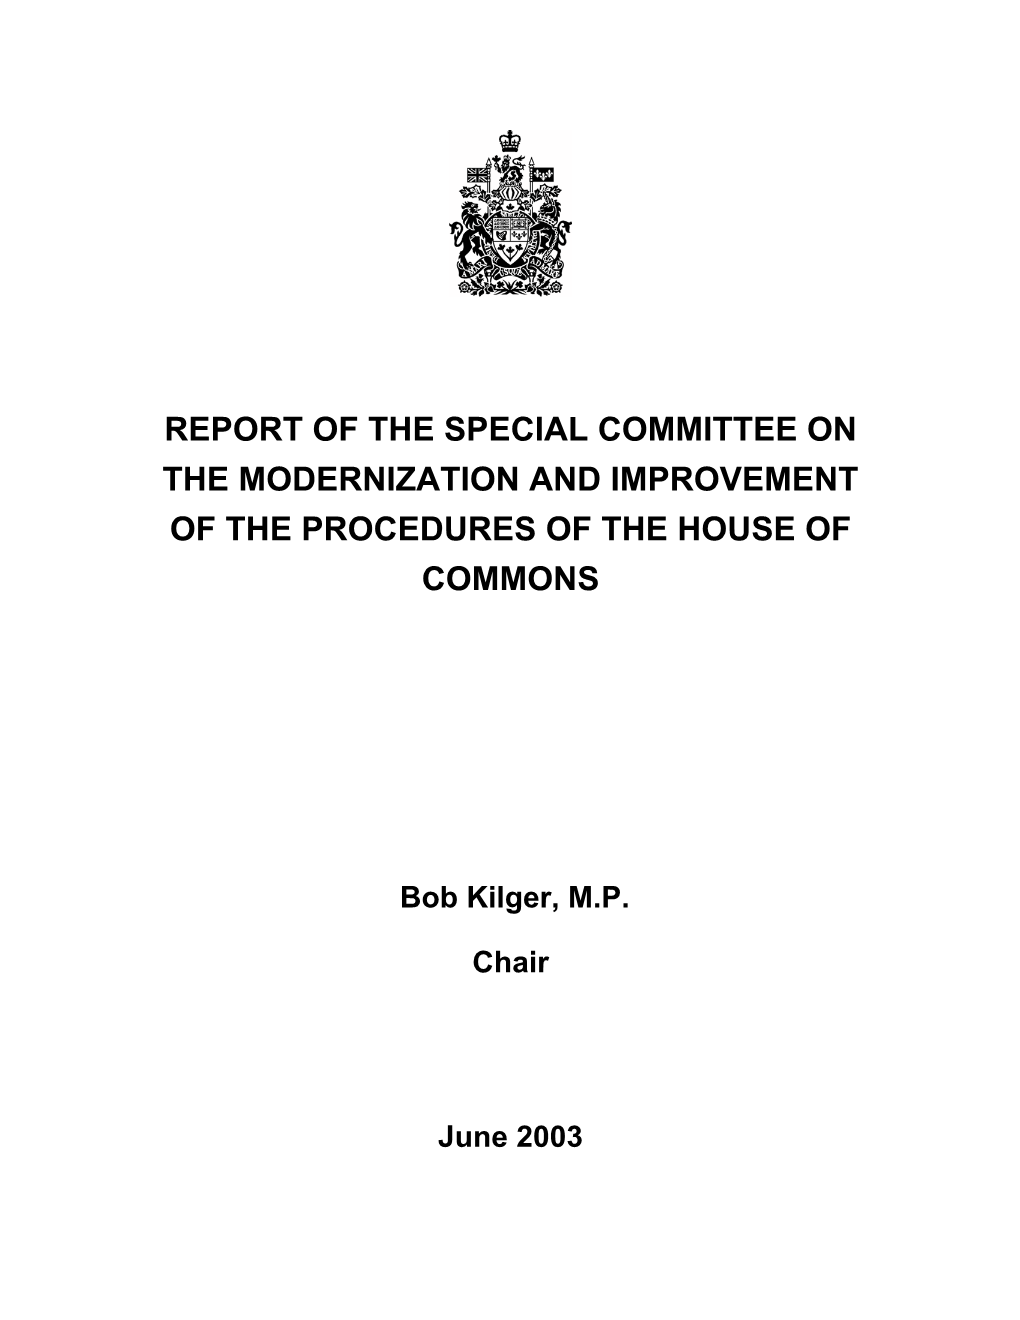 The Special Committee on the Modernization and Improvement of the Procedures of the House of Commons Has the Honour to Present Its